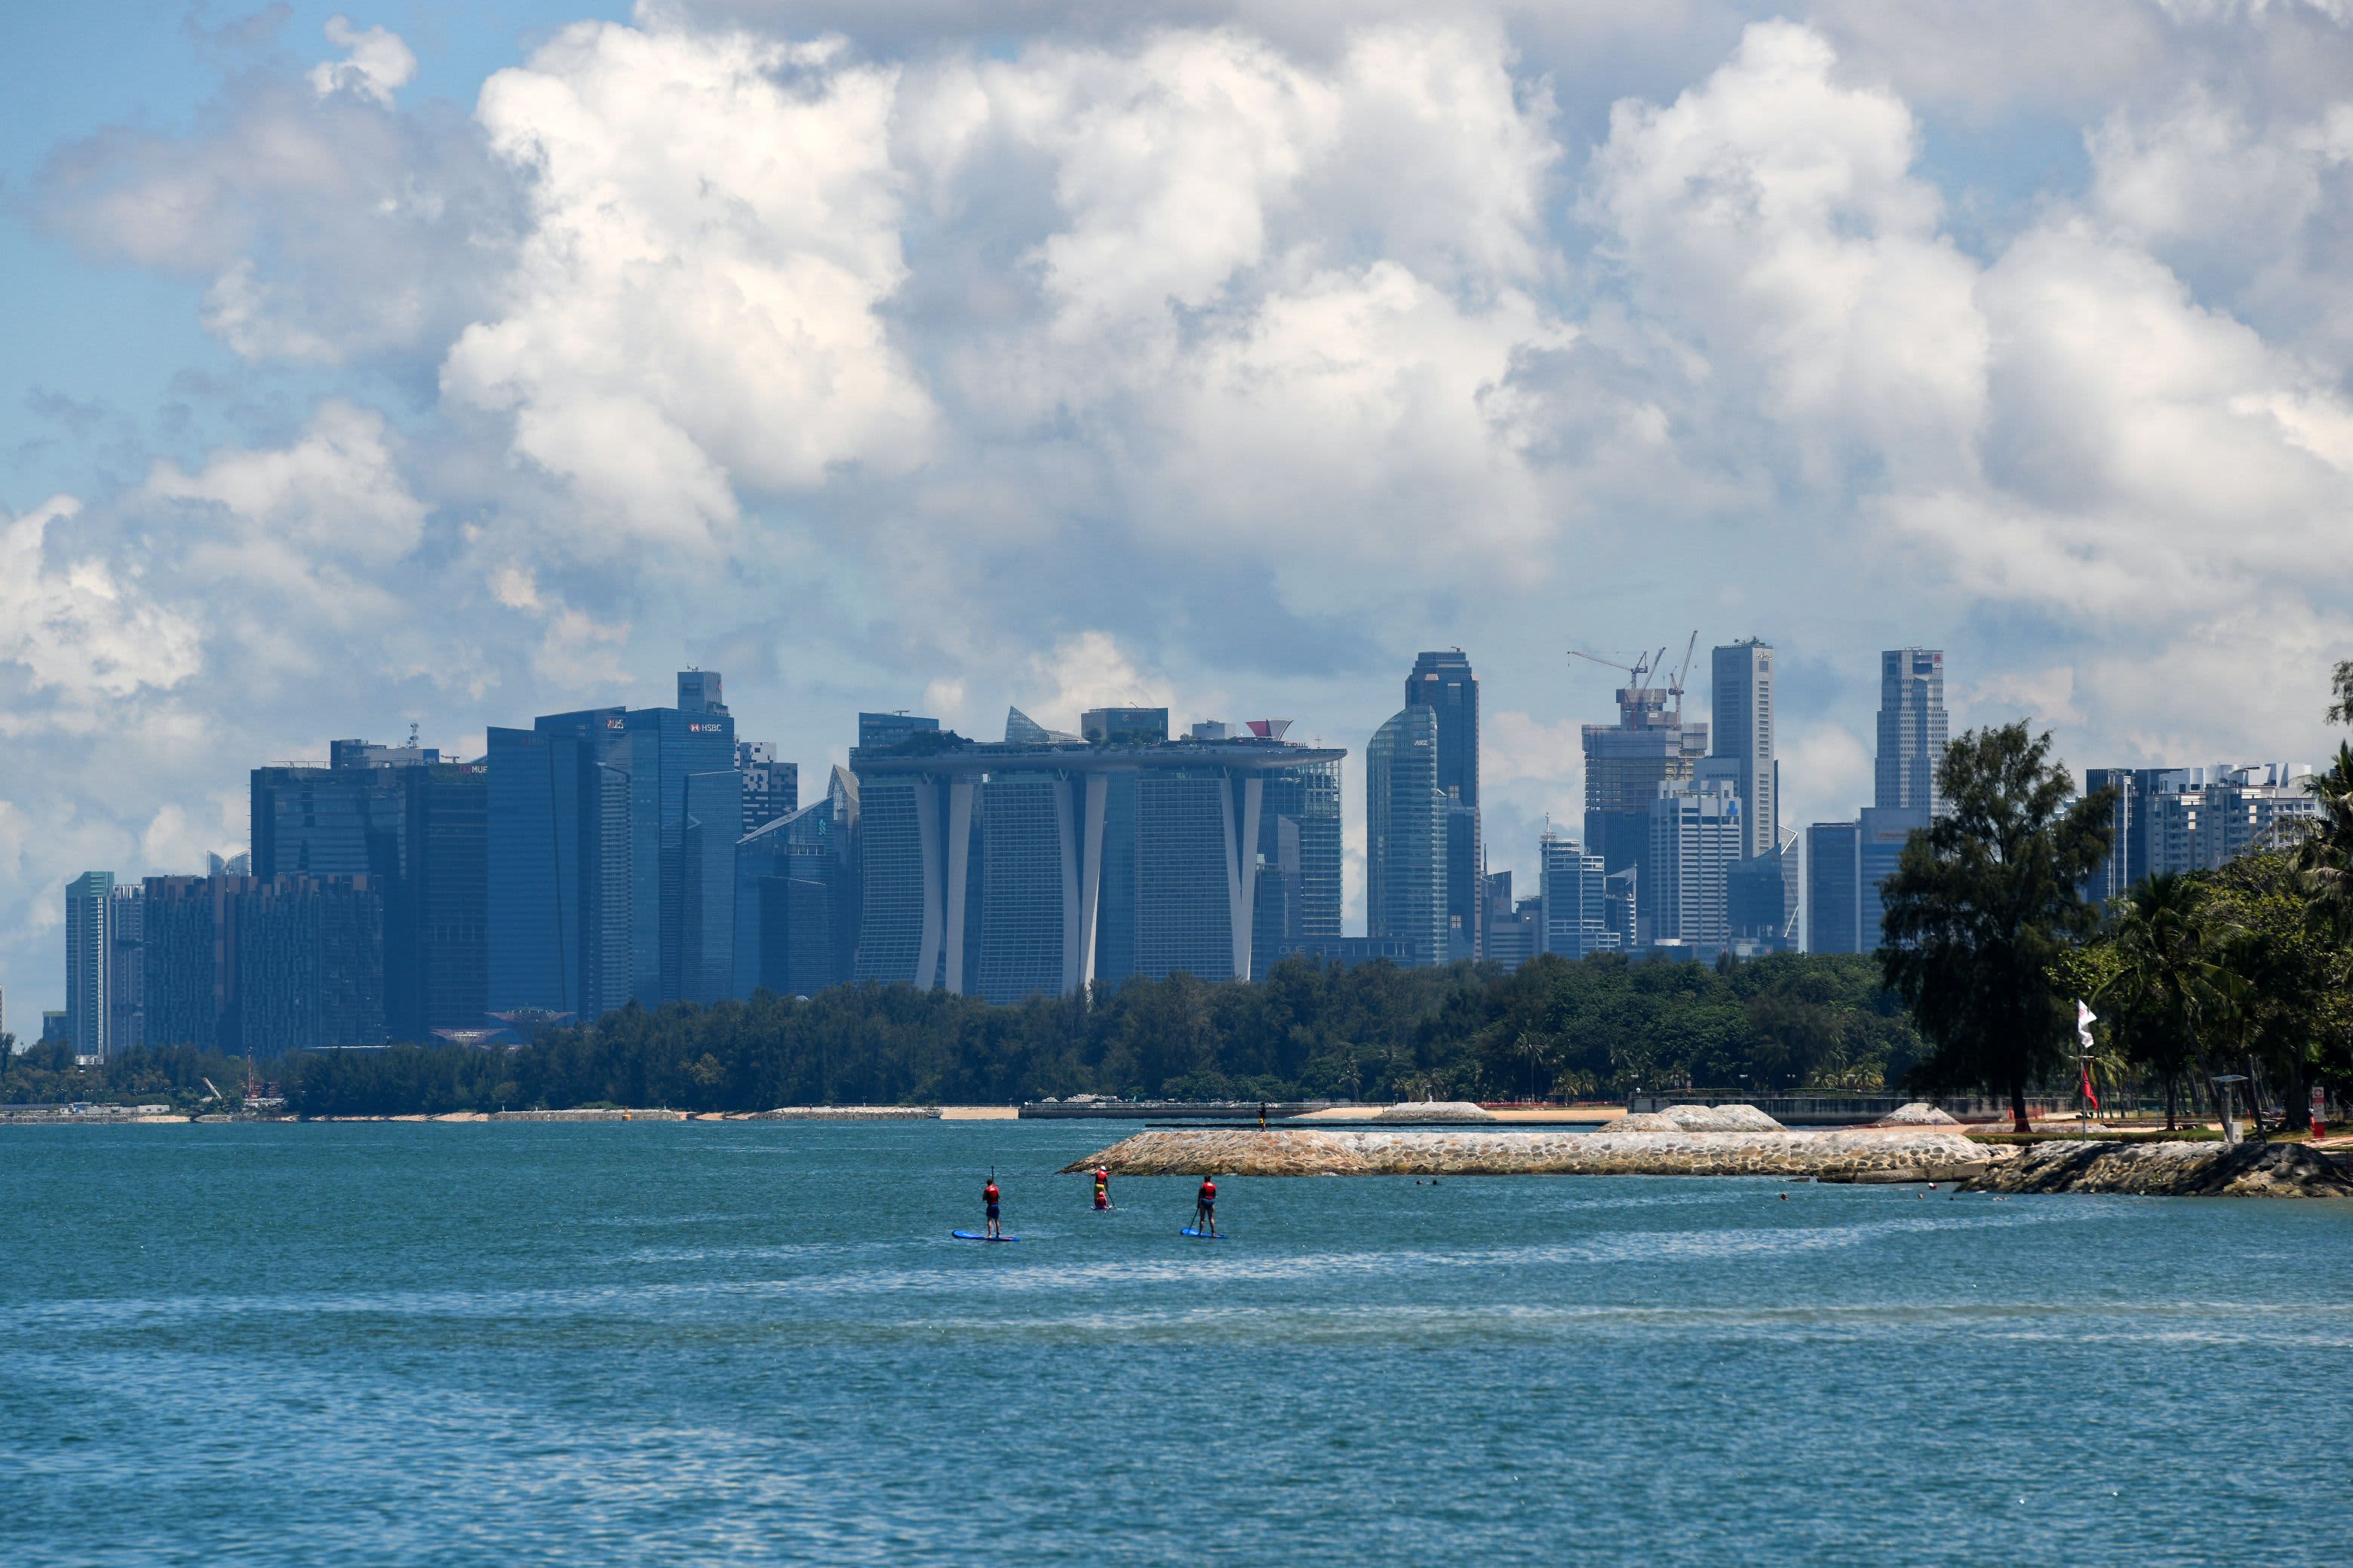 Singapore finance minister says it could become a regional hub for green finance